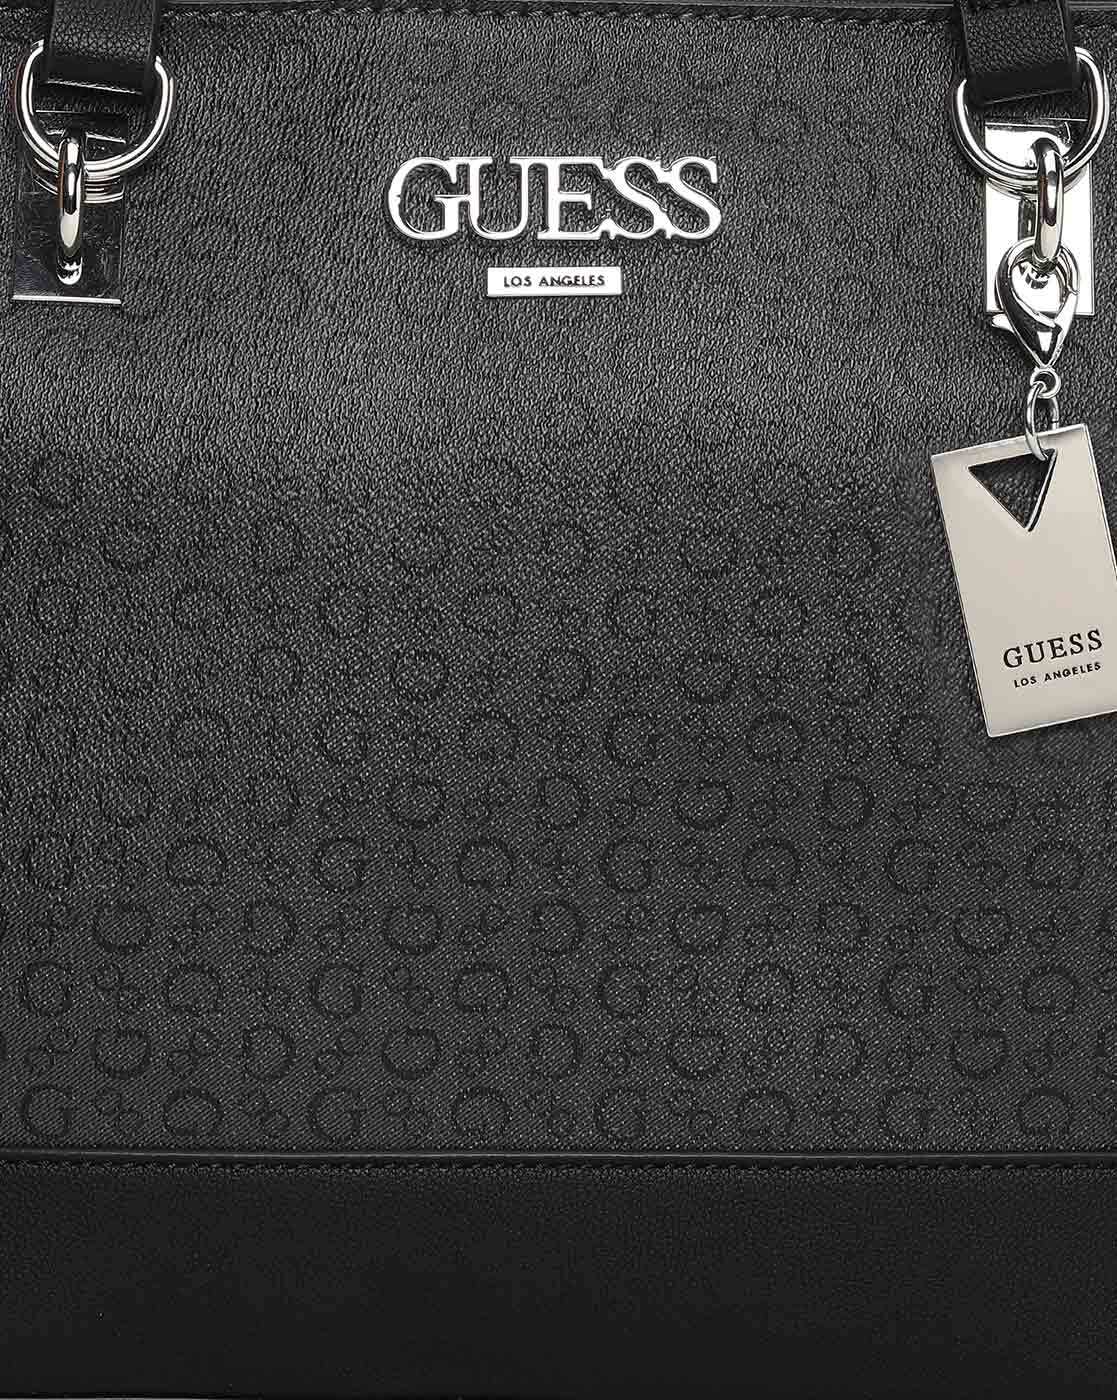 D SHOP - •Guess 🏵️New Collection is here 🏵️ Check it out :  https://www.dshop.com.gr/el/brands/guess/ #guess #DShop #bags #wallets  #newcollection #SS22 | Facebook